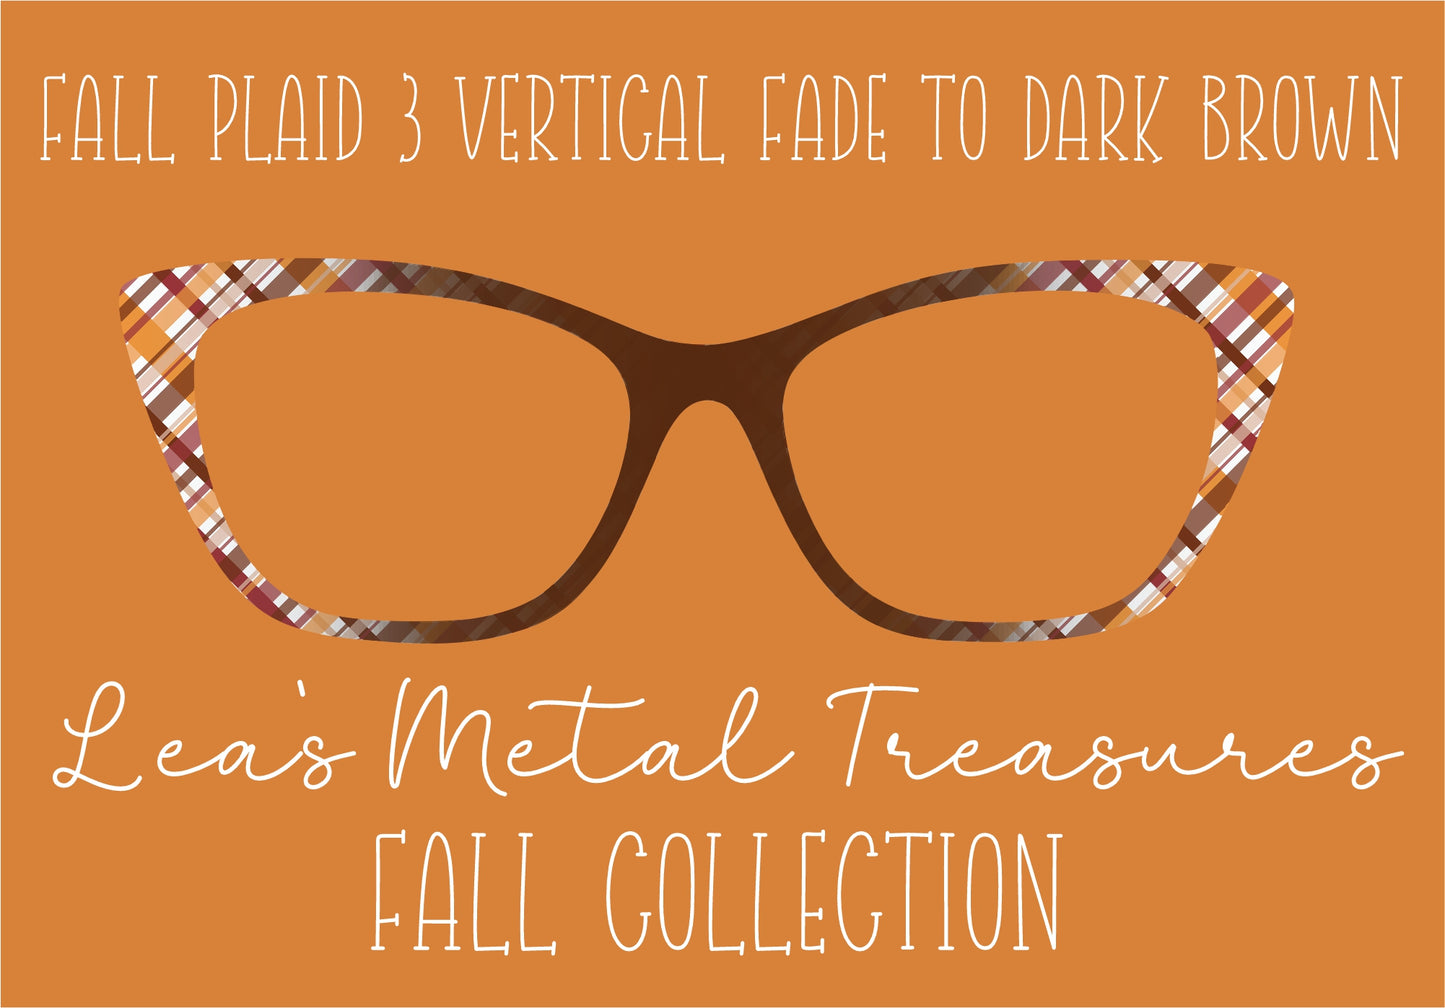 FALL PLAID 3 VERTICAL FADE TO DARK BROWN Eyewear Frame Toppers COMES WITH MAGNETS